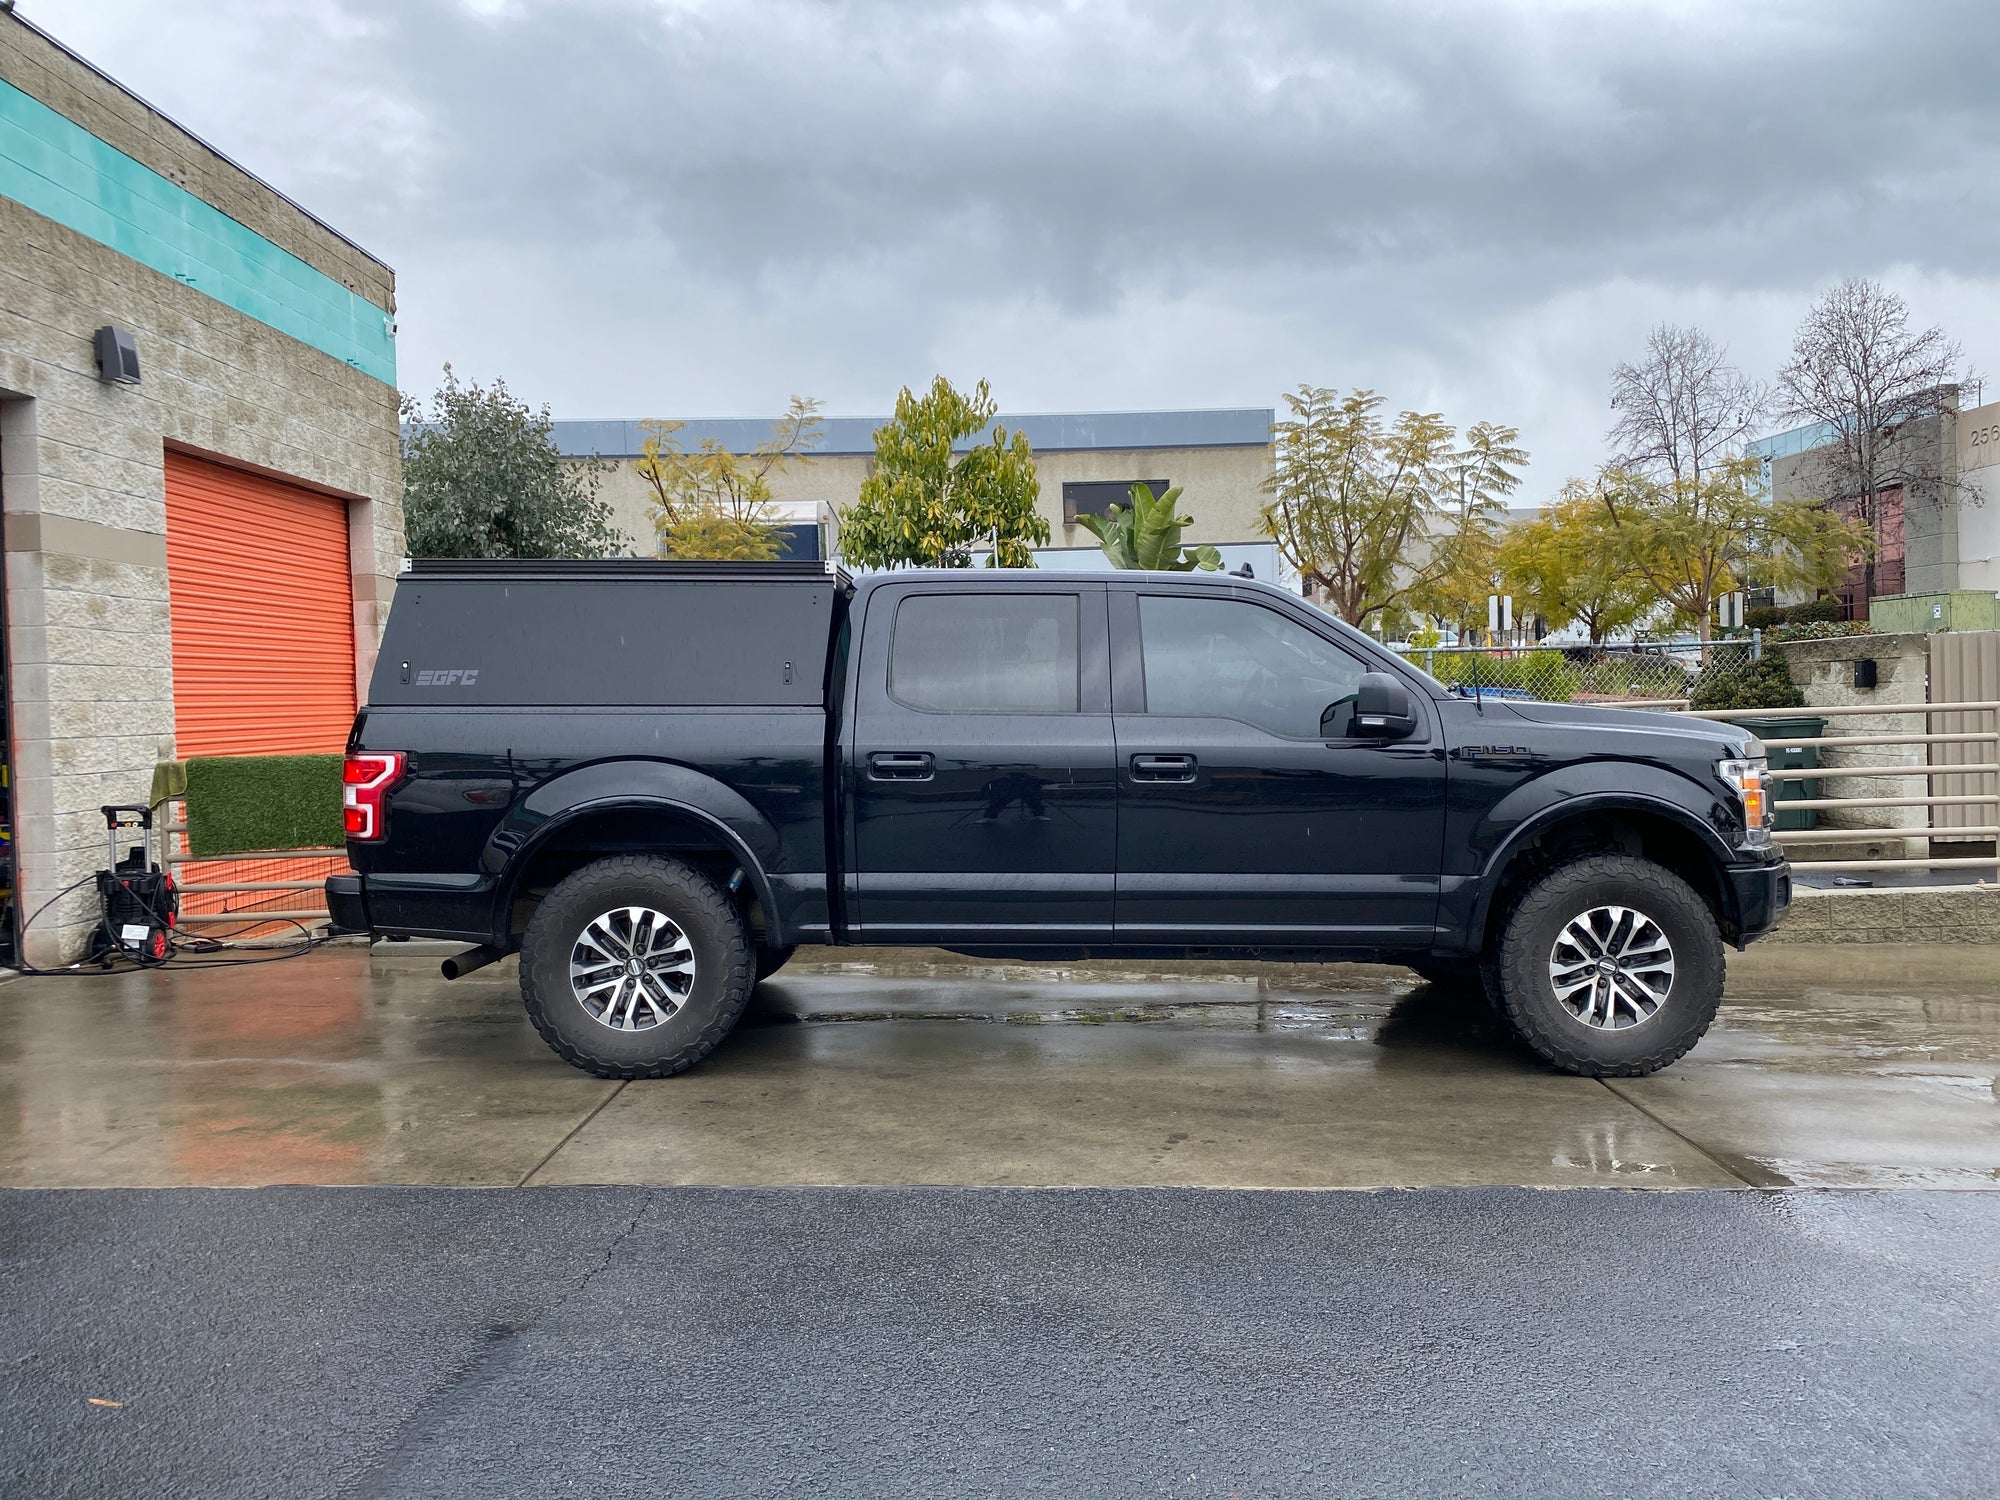 2018 Ford F150 Topper - Build #157